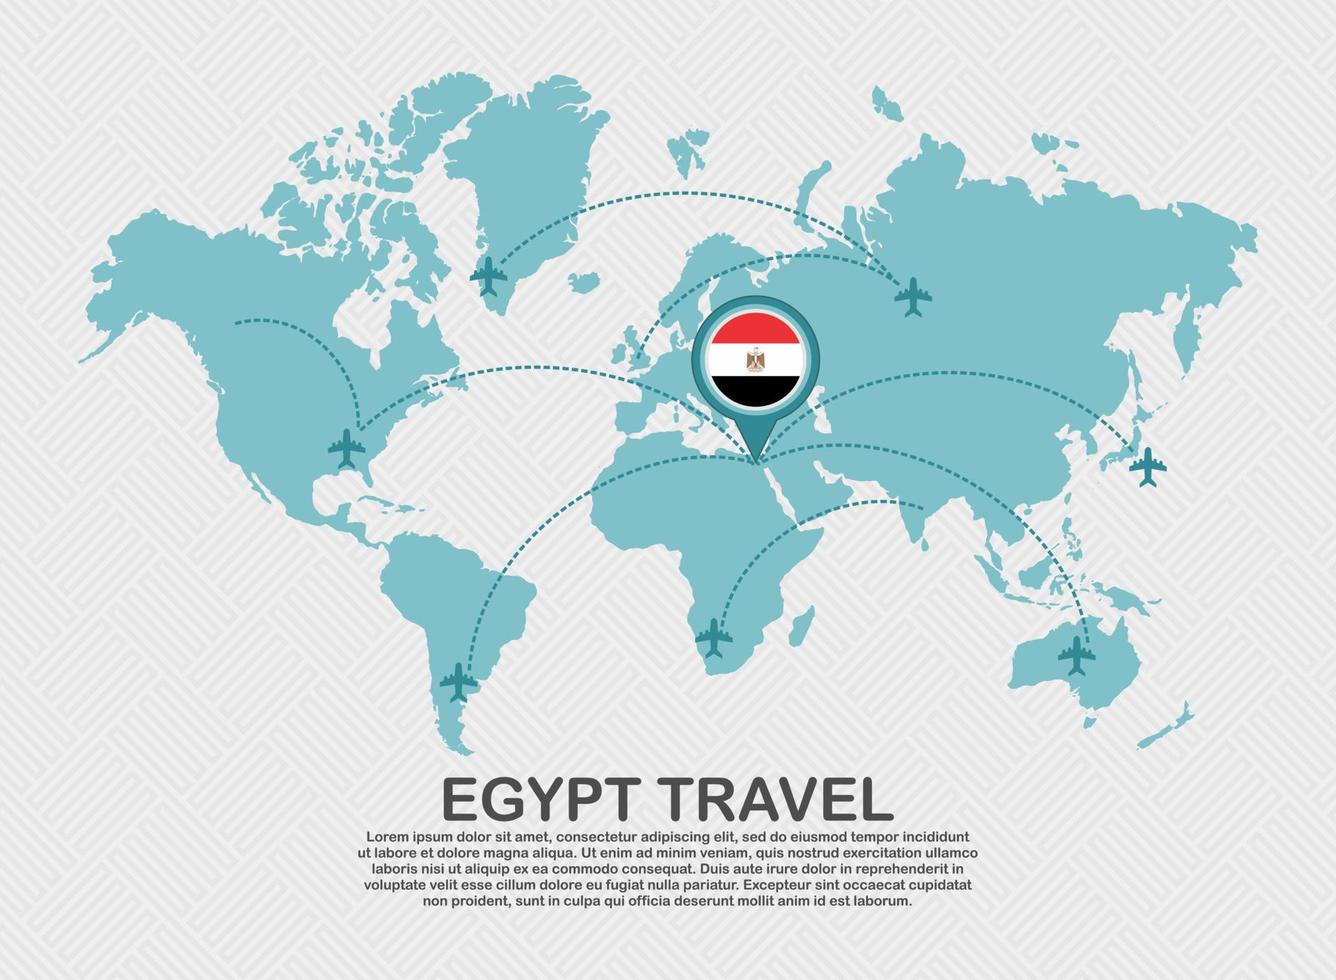 Travel to Egypt poster with world map and flying plane route business background tourism destination concept vector